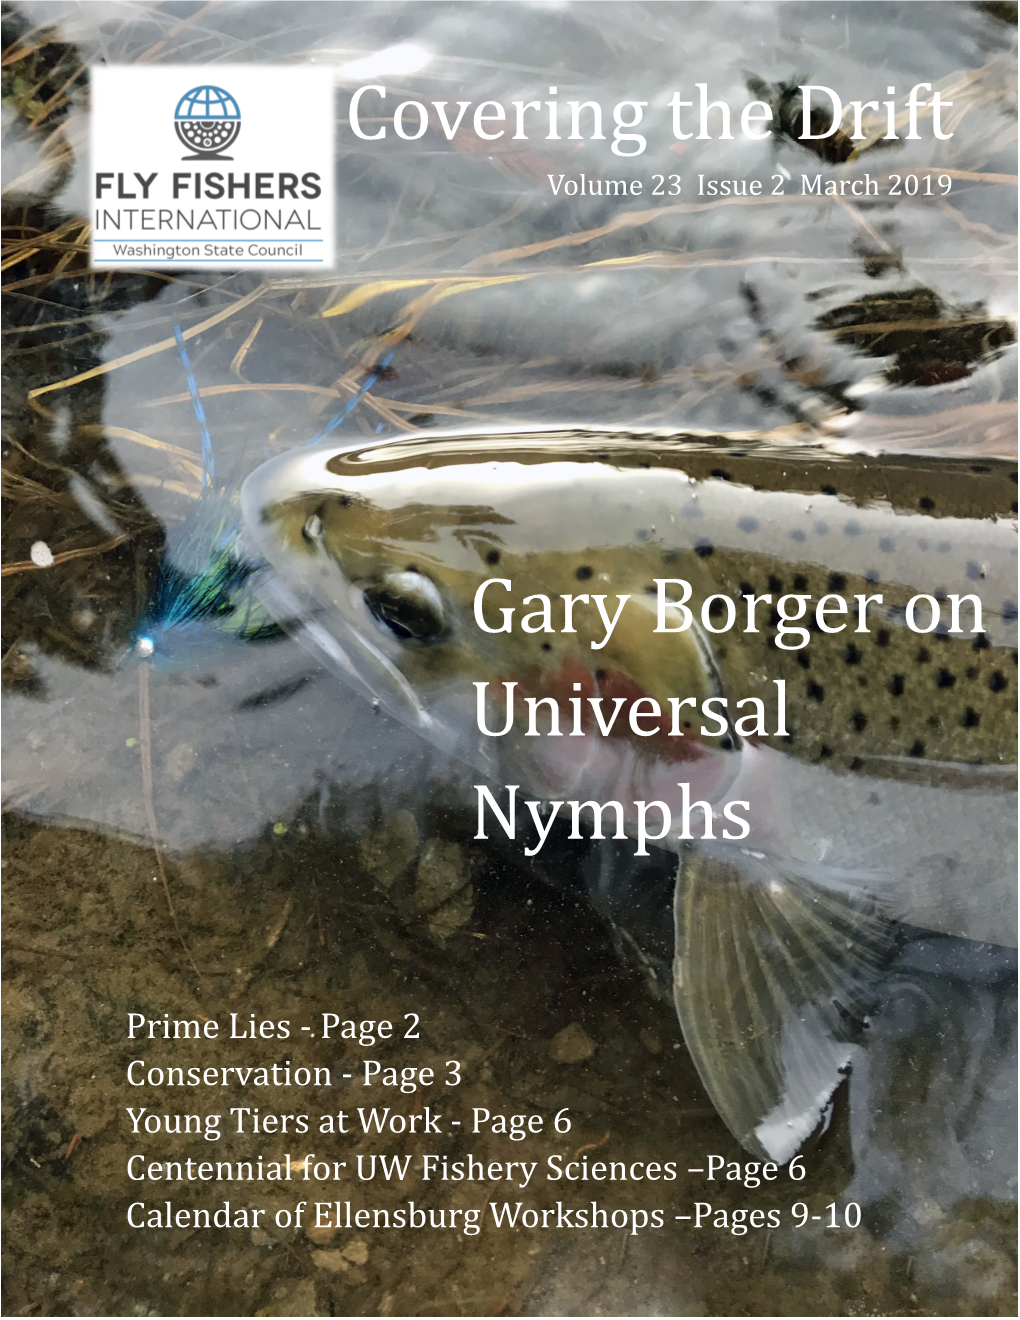 Covering the Drift Gary Borger on Universal Nymphs